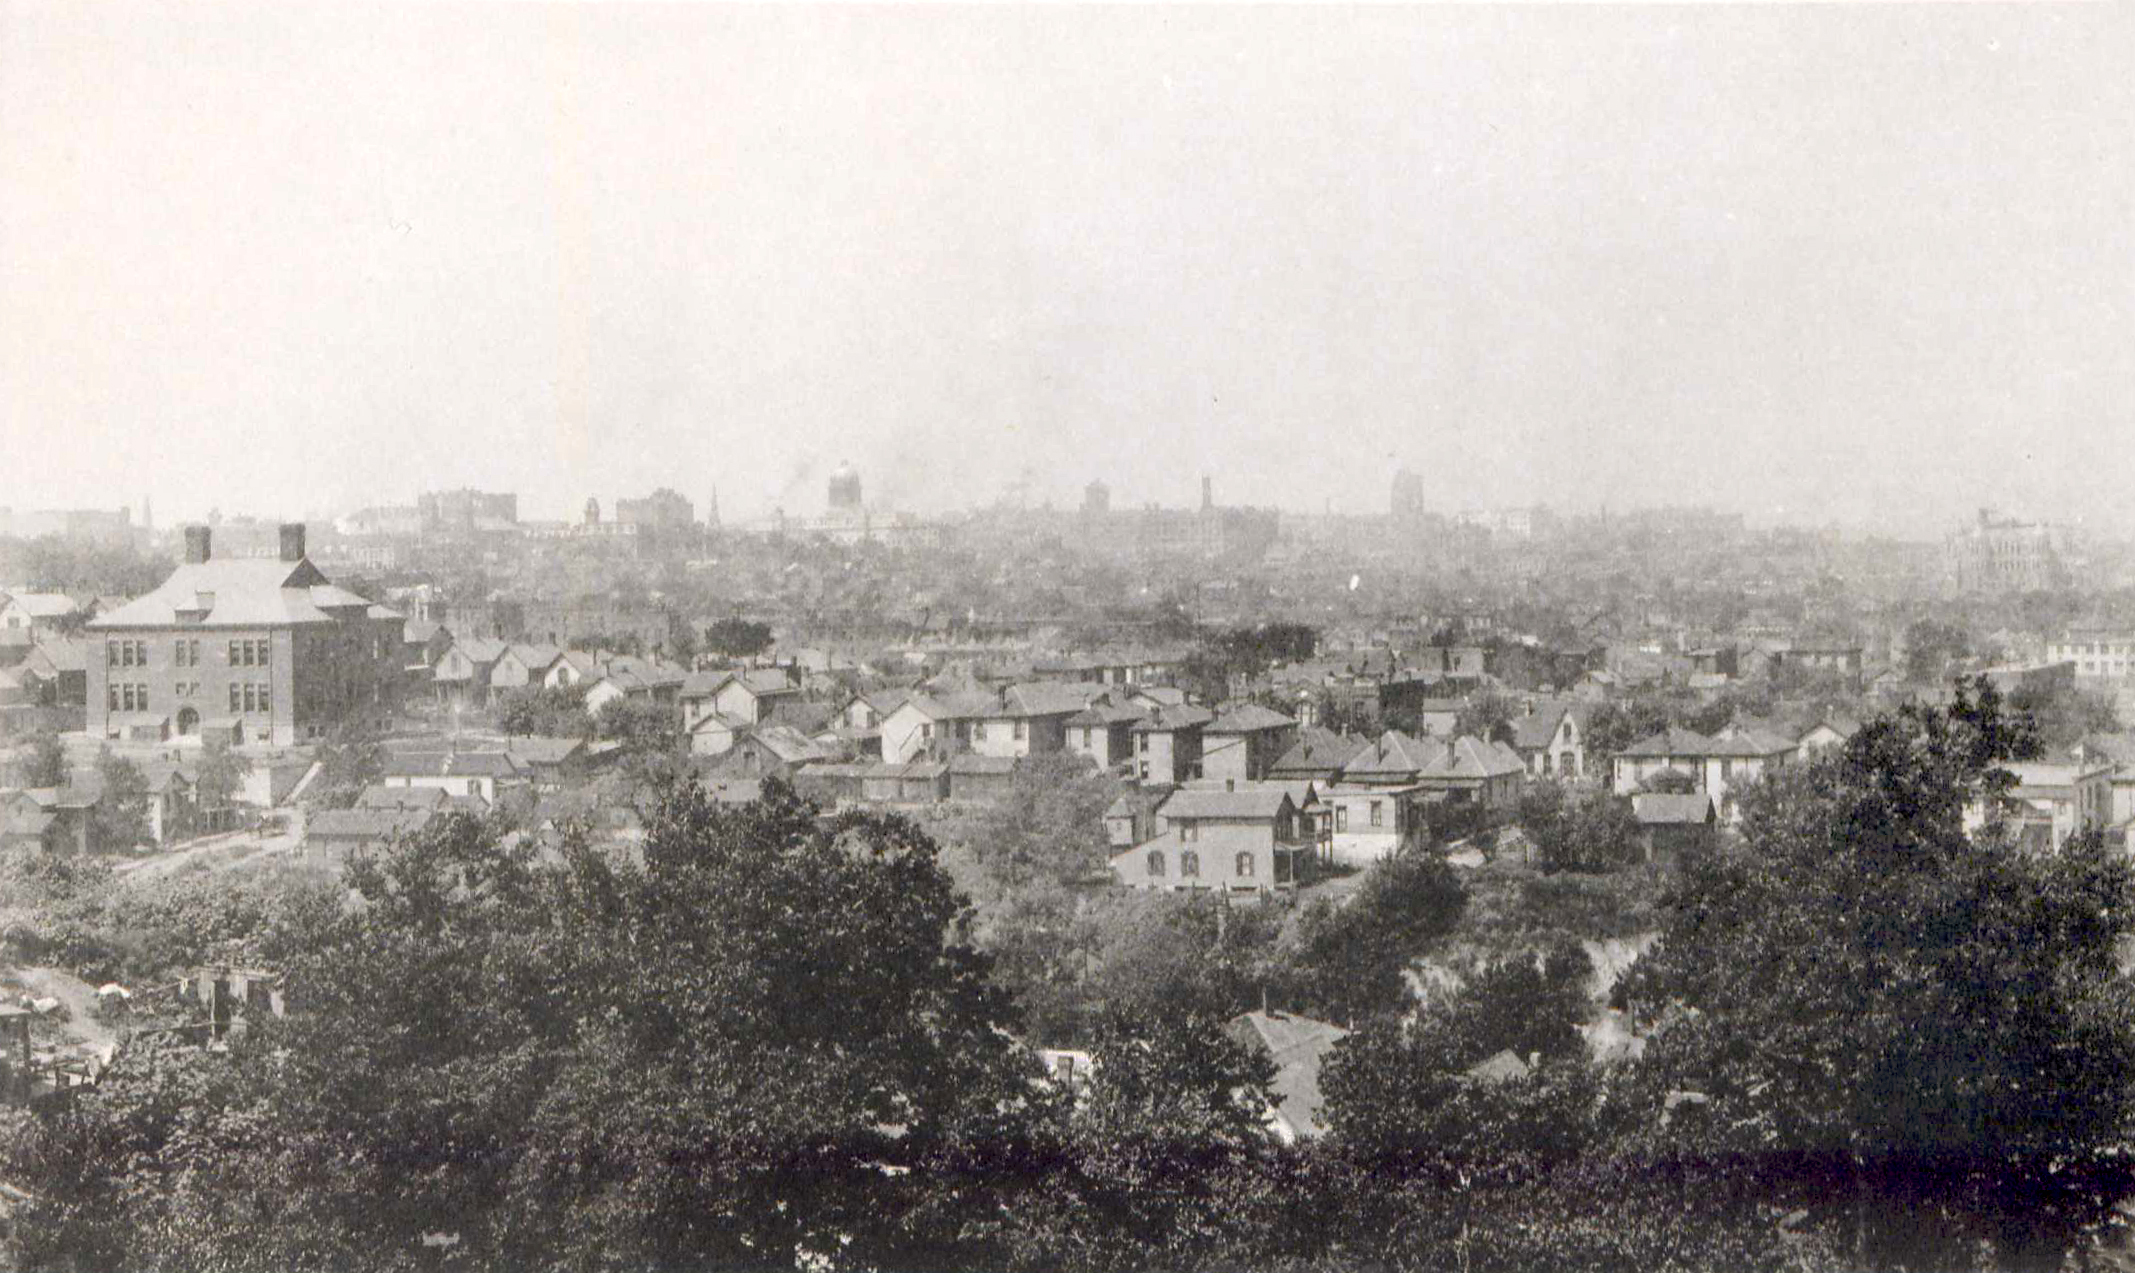 Belvidere Hollow from Highland Avenue near North Terrace Park in 1900.